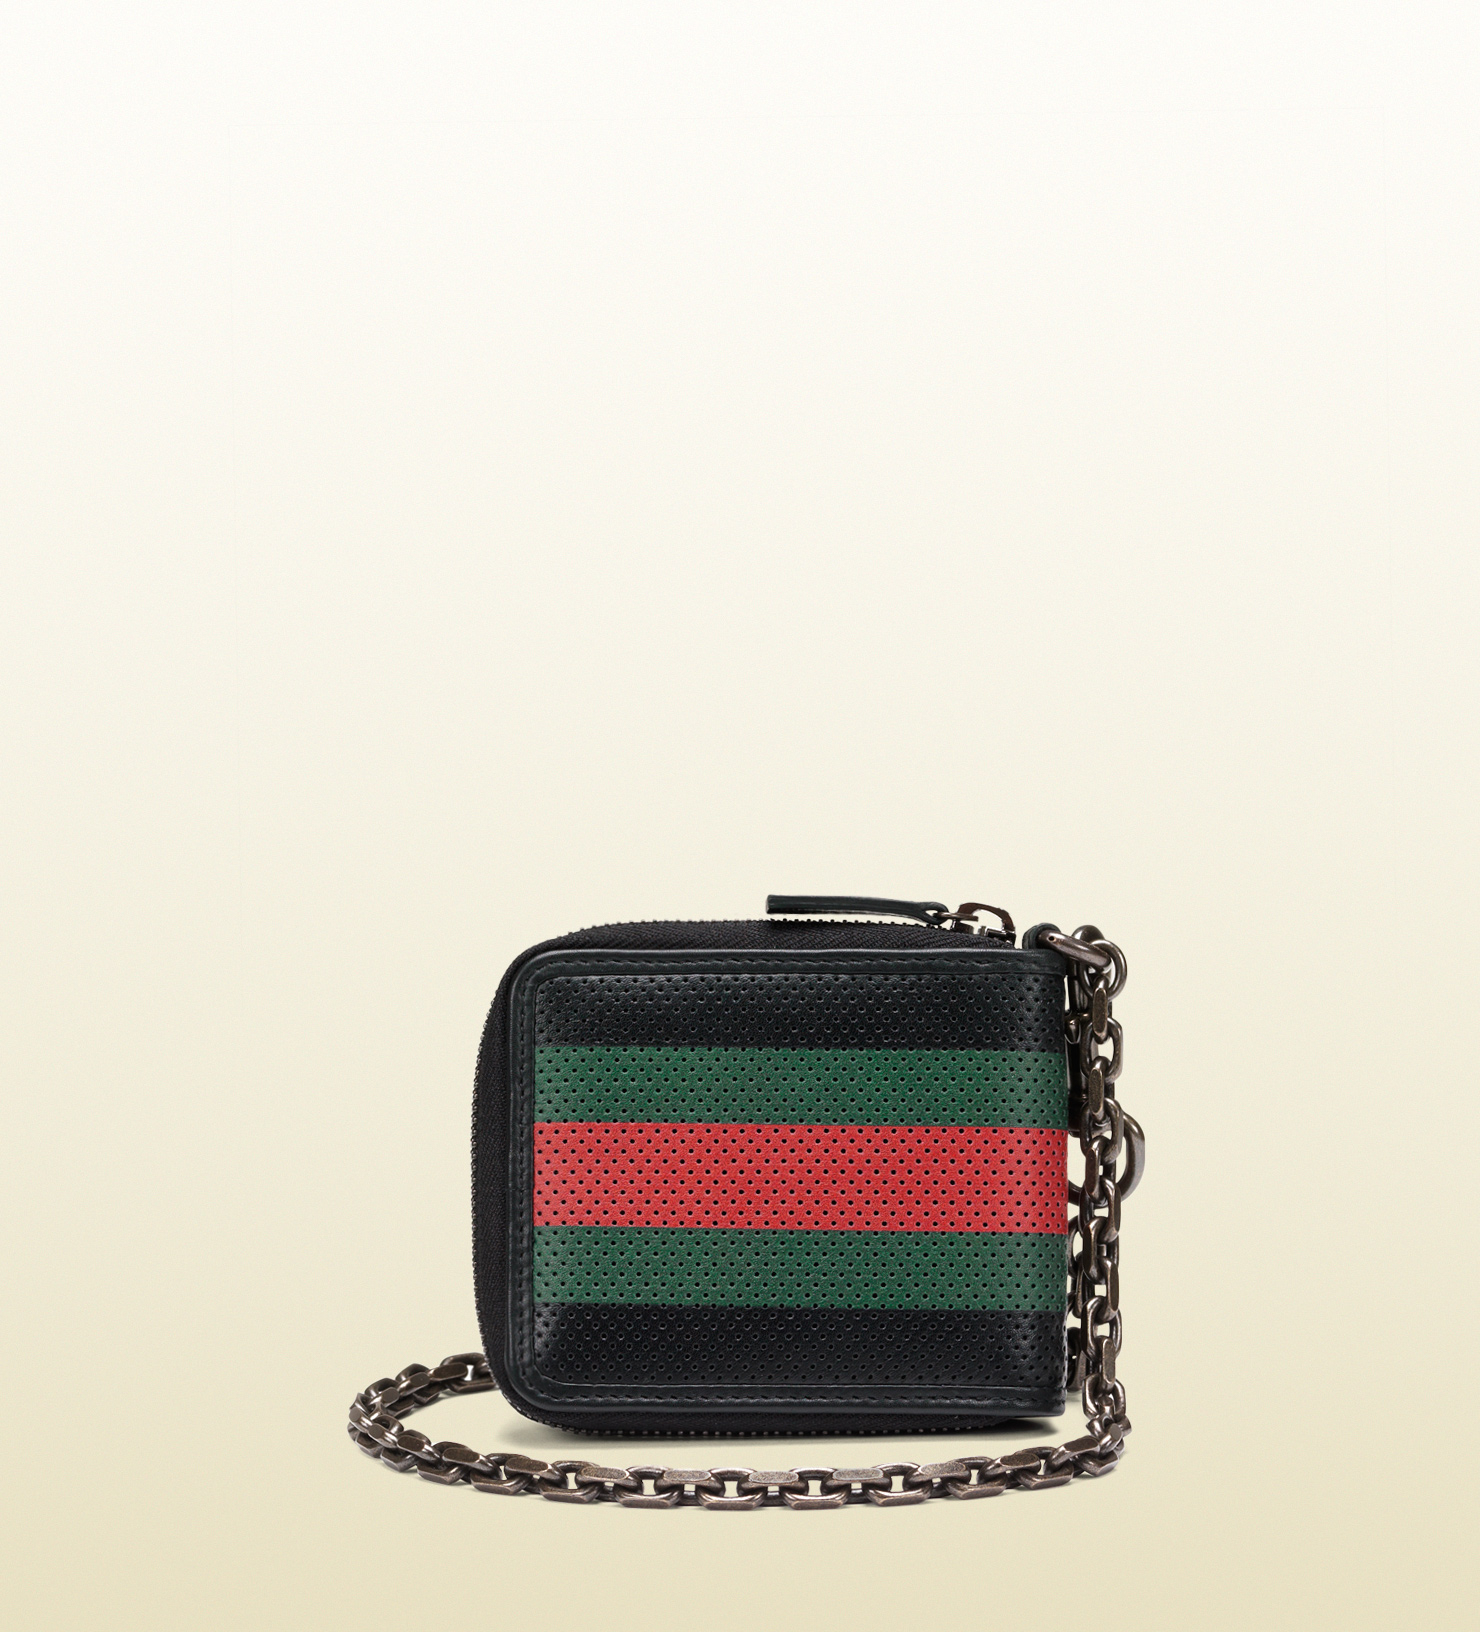 Lyst - Gucci Perforated Leather Web Chain Wallet in Black for Men